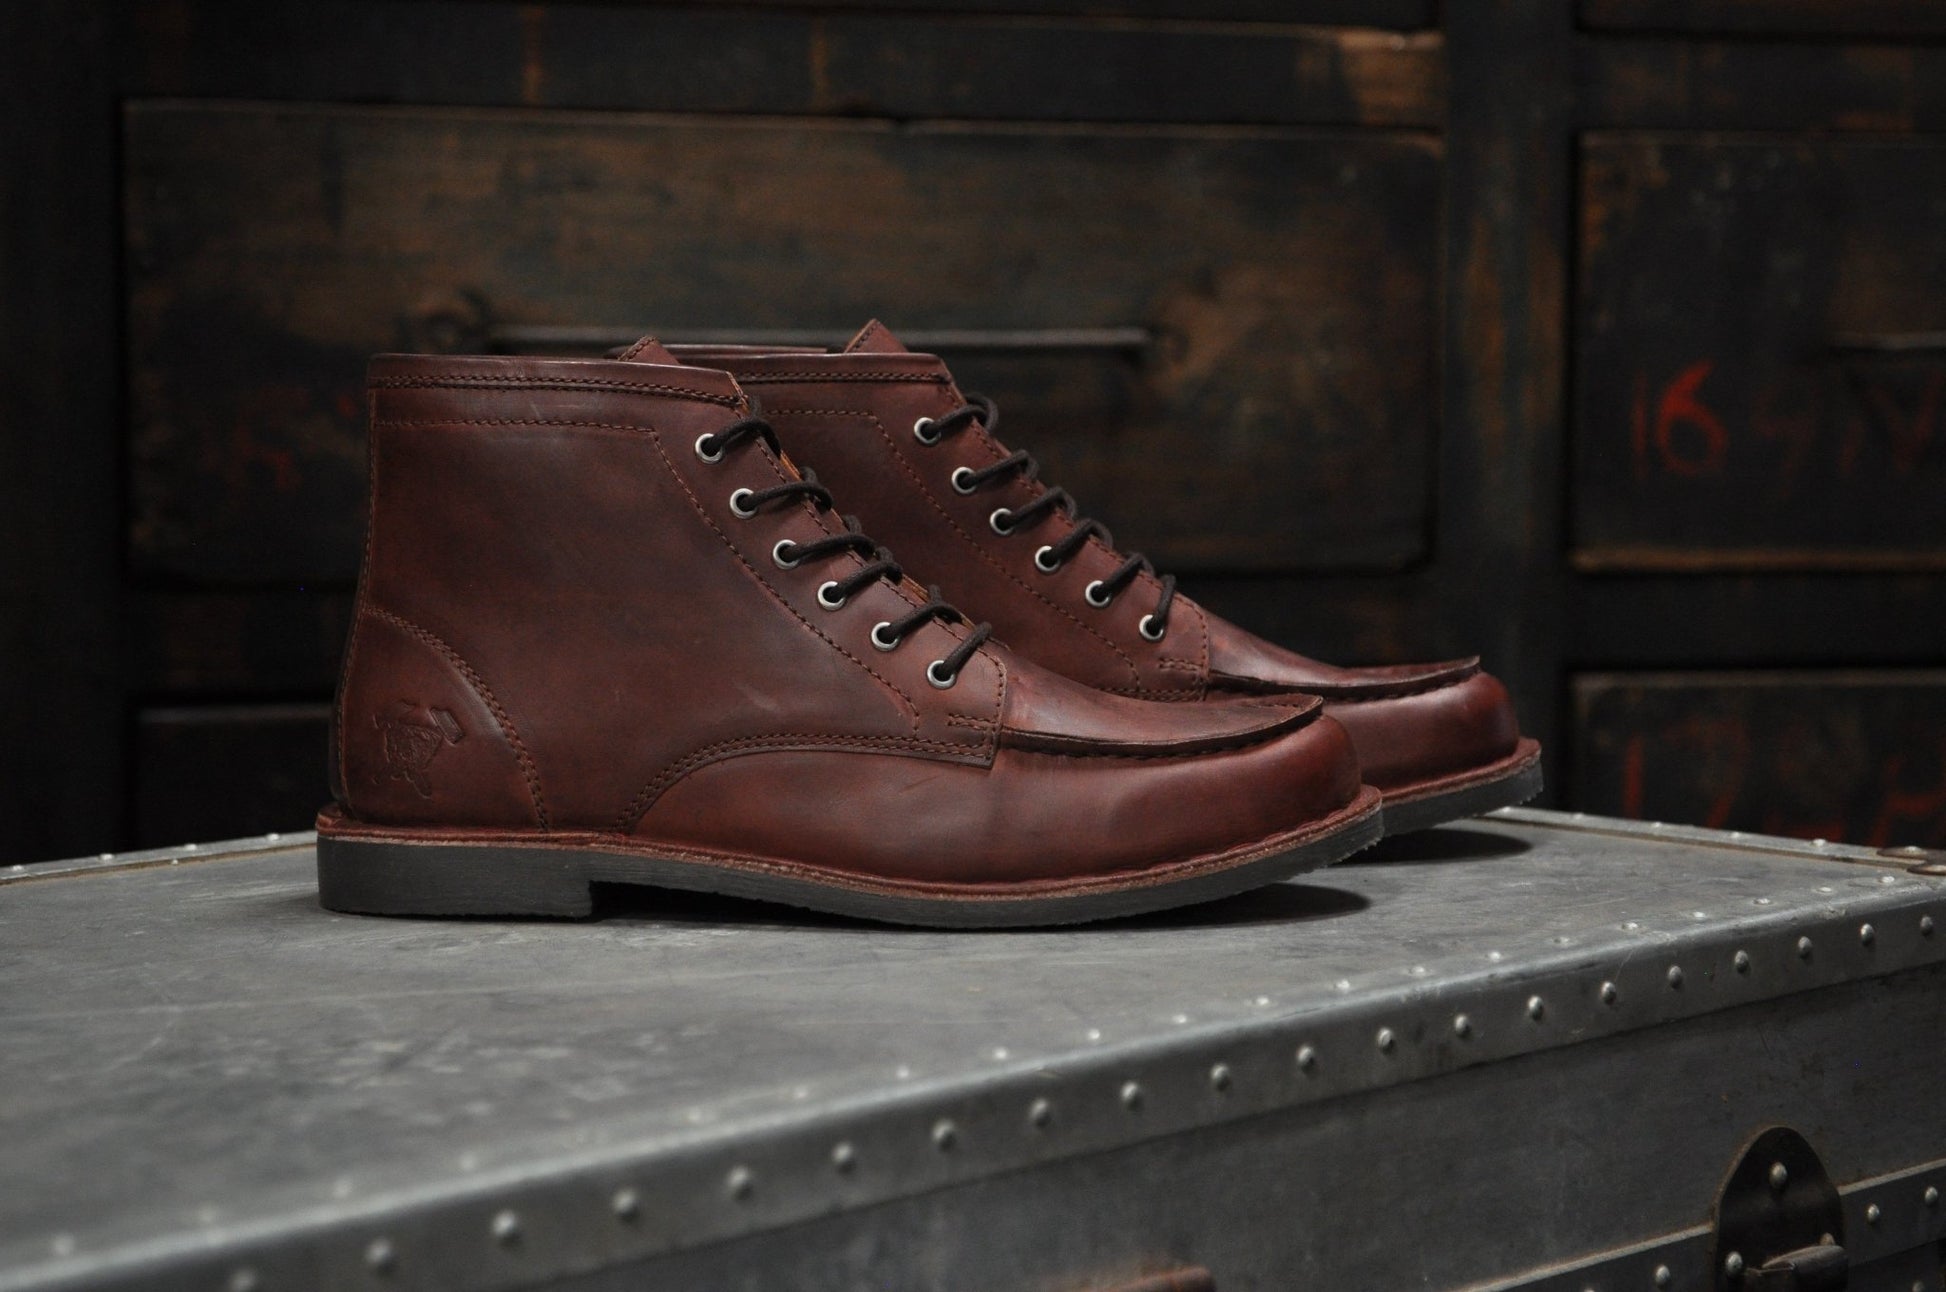 Hound & Hammer "The Cooper" Oxblood Leather Work Boots for Men - Men - Footwear - Boots - Ankle Boots - Benn~Burry